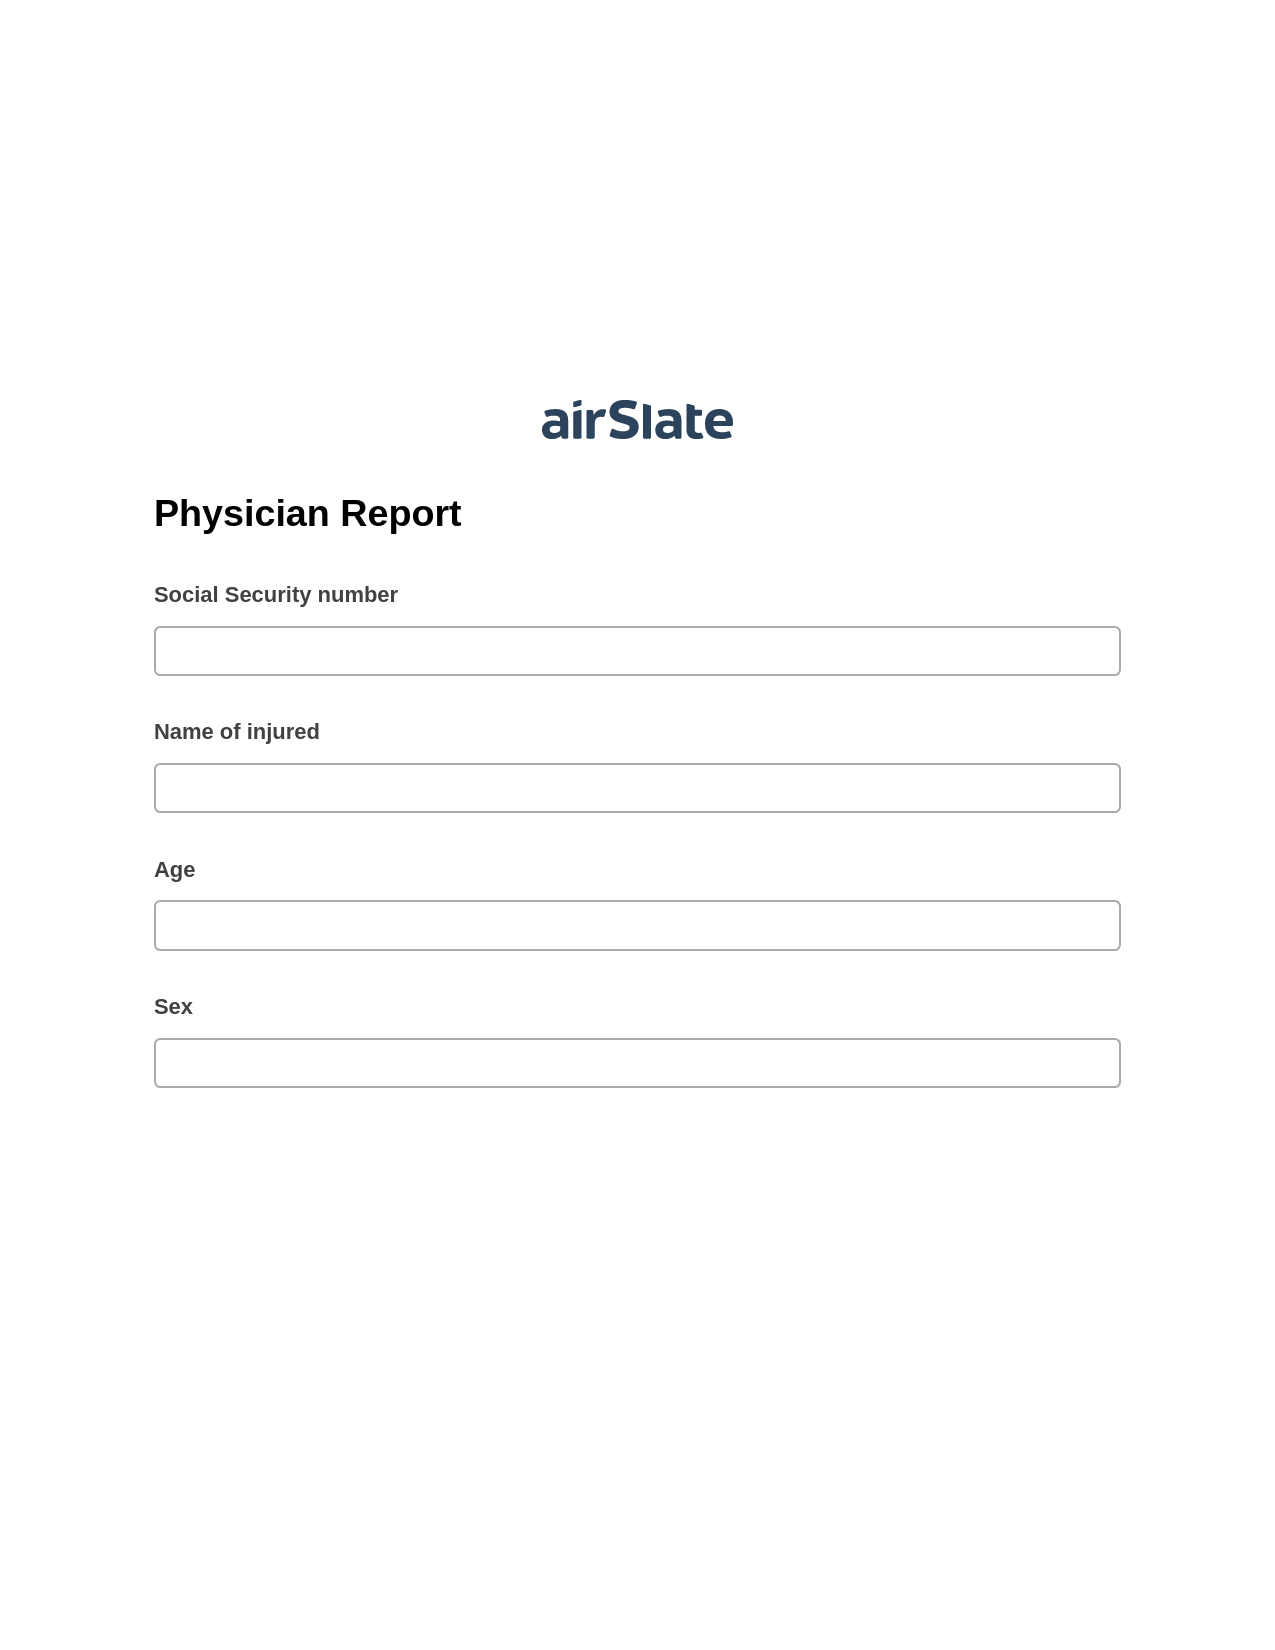 Multirole Physician Report Pre-fill Dropdowns from CSV file Bot, Update NetSuite Record Bot, Archive to SharePoint Folder Bot